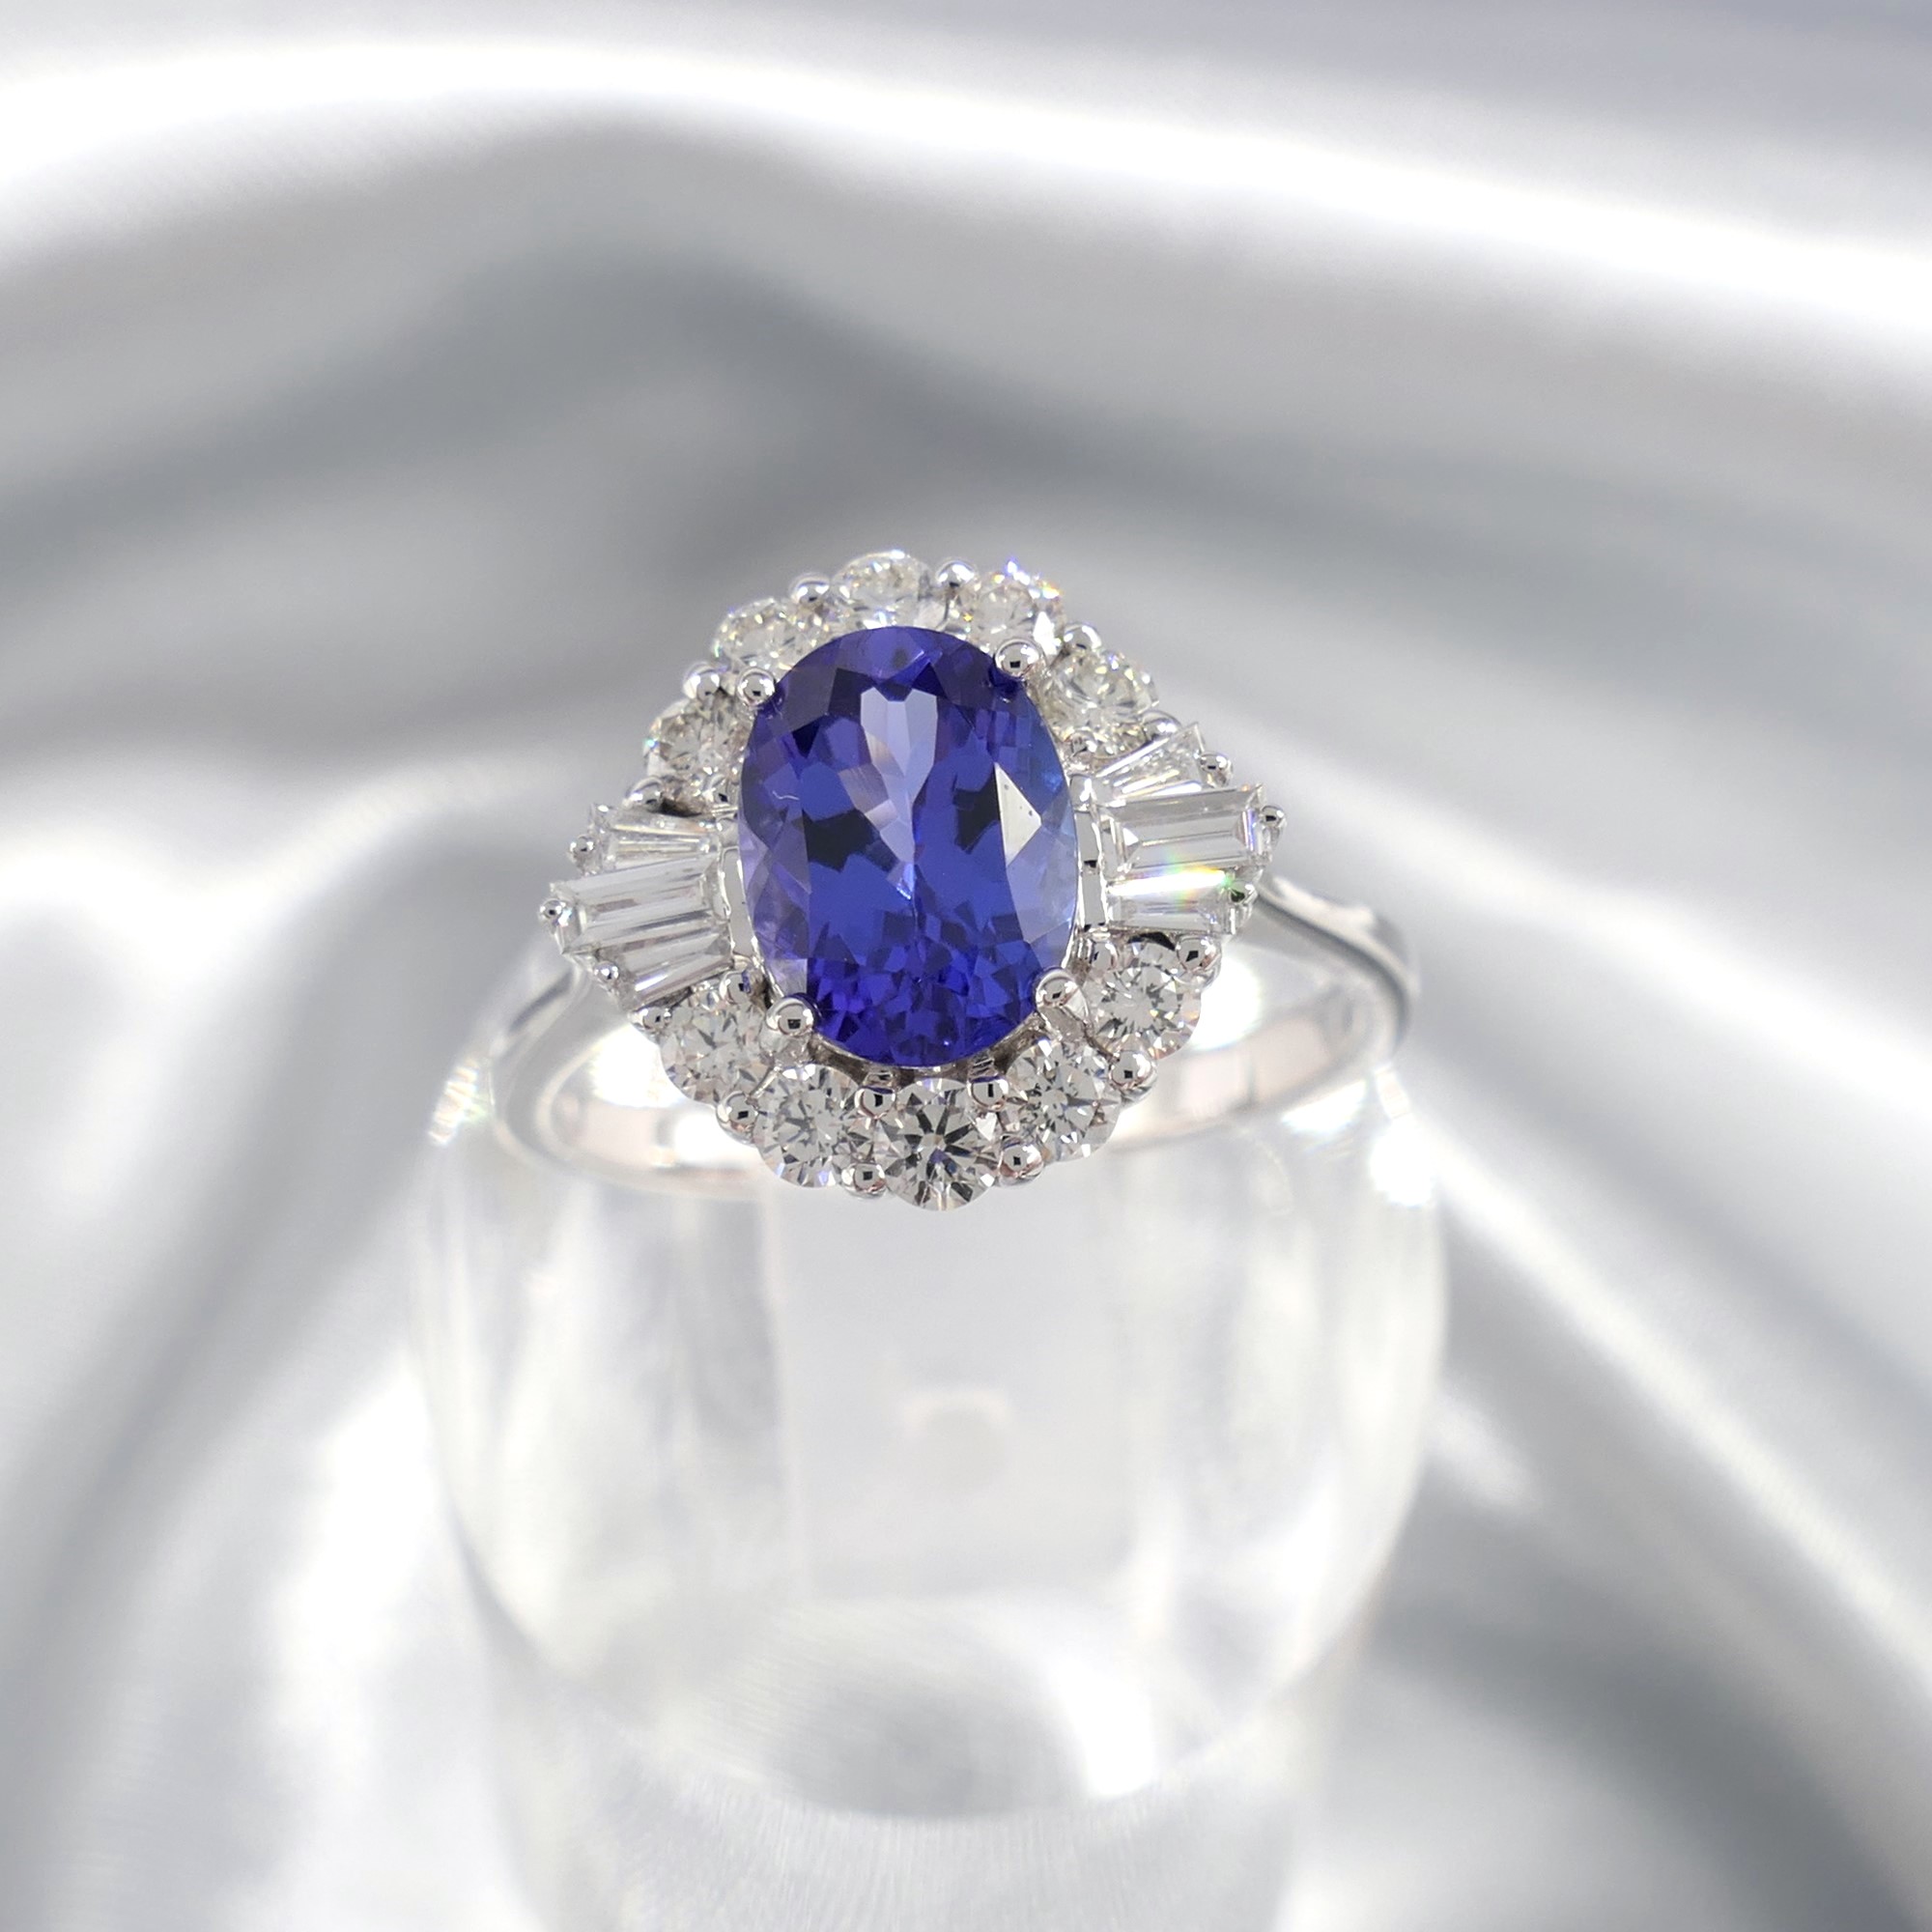 Stylish 1.37 Carat Tanzanite and 0.57 Carat Diamond Cluster Ring In 18ct White Gold - Image 5 of 7